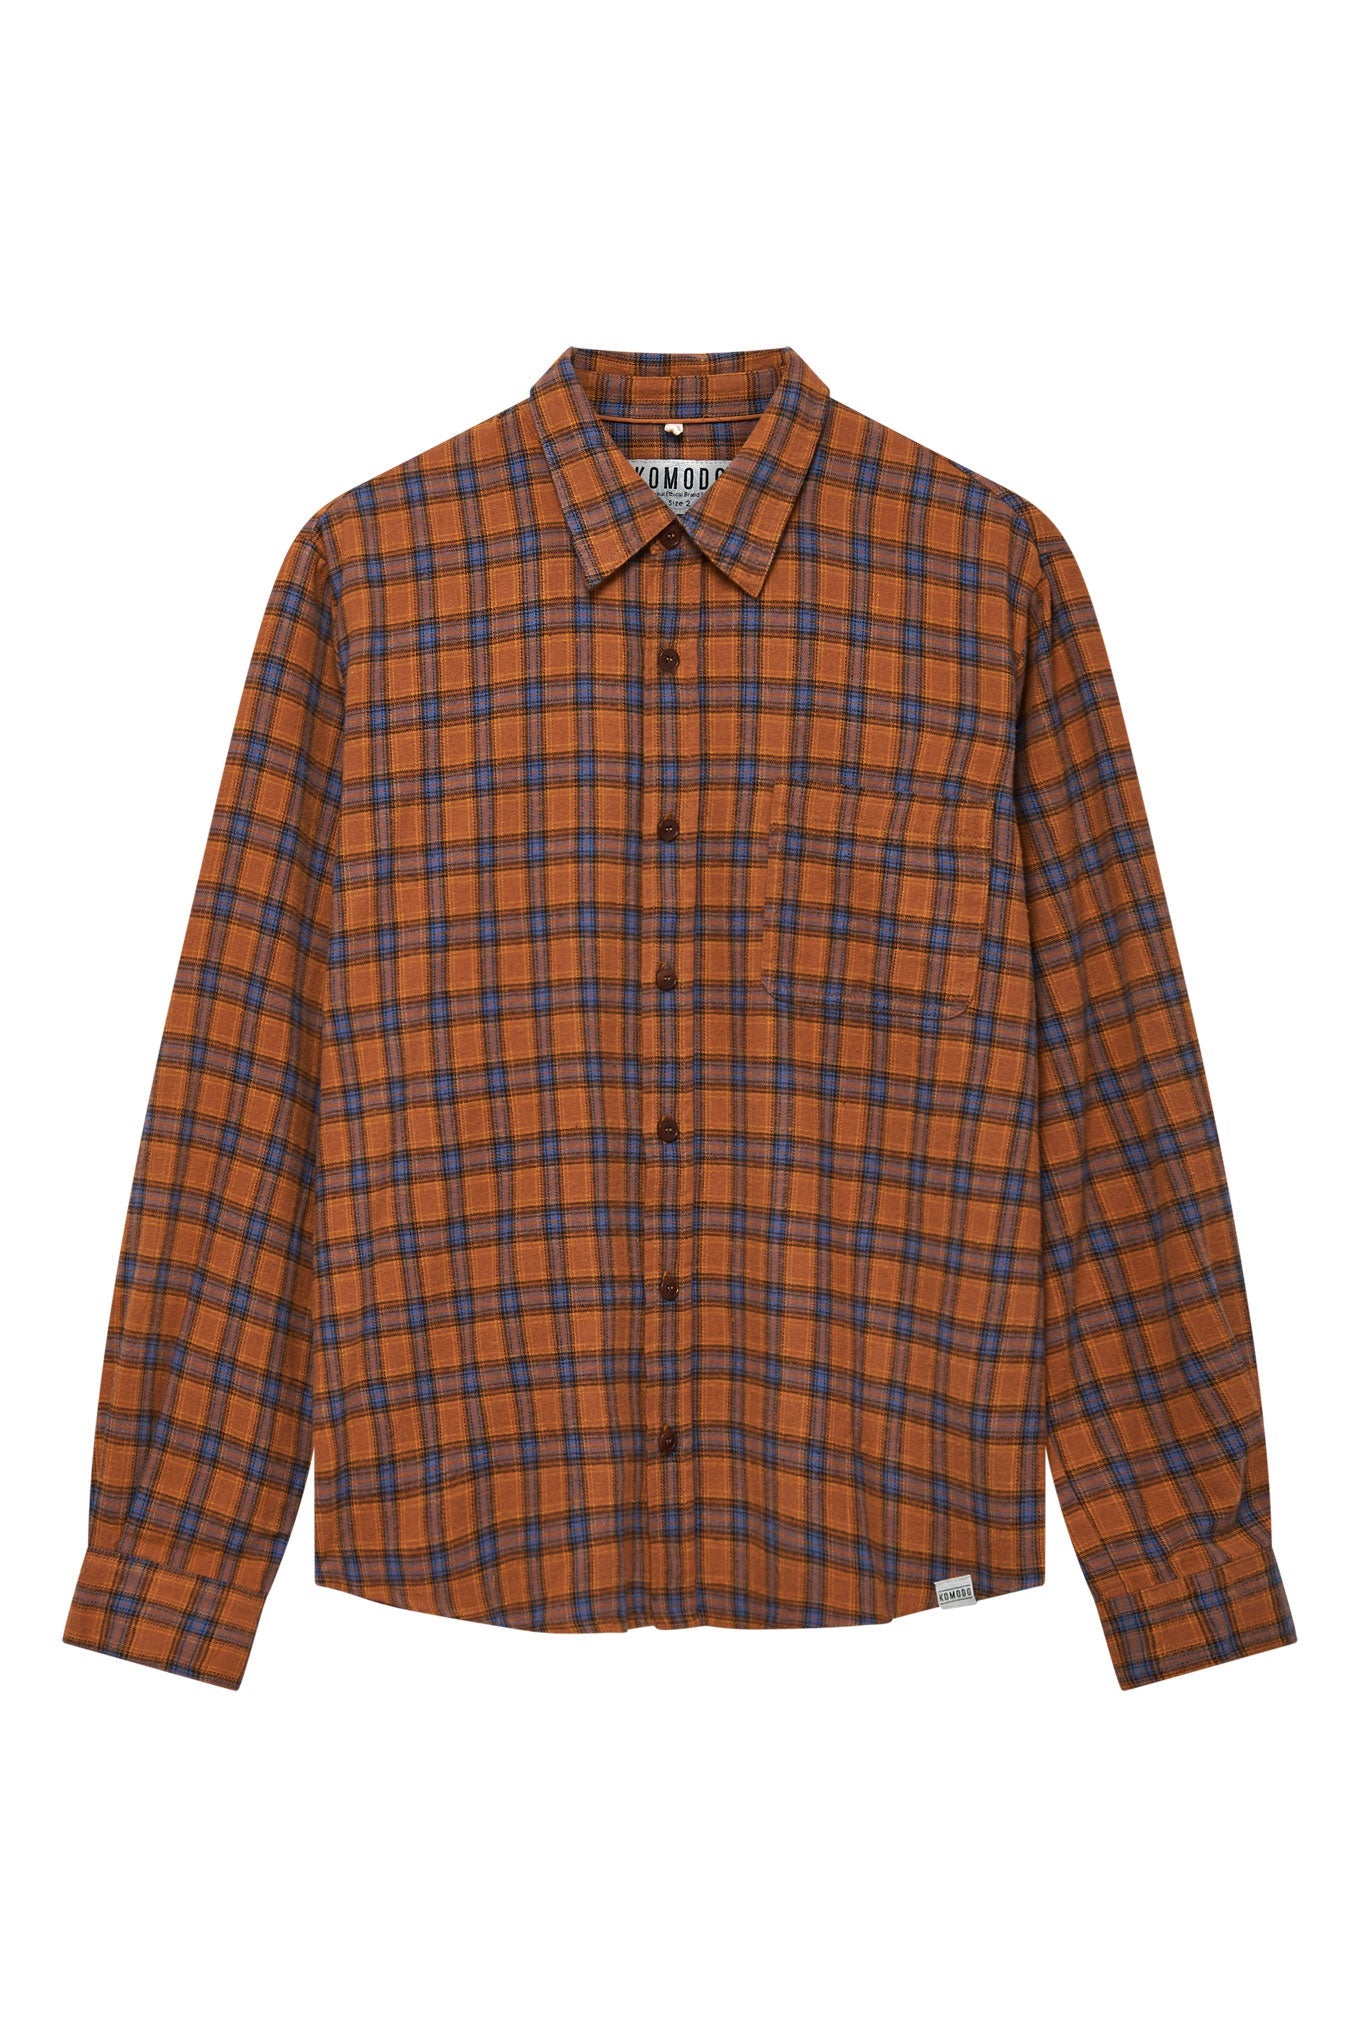 Colorful, checked shirt SANTI made from 100% organic cotton from Komodo